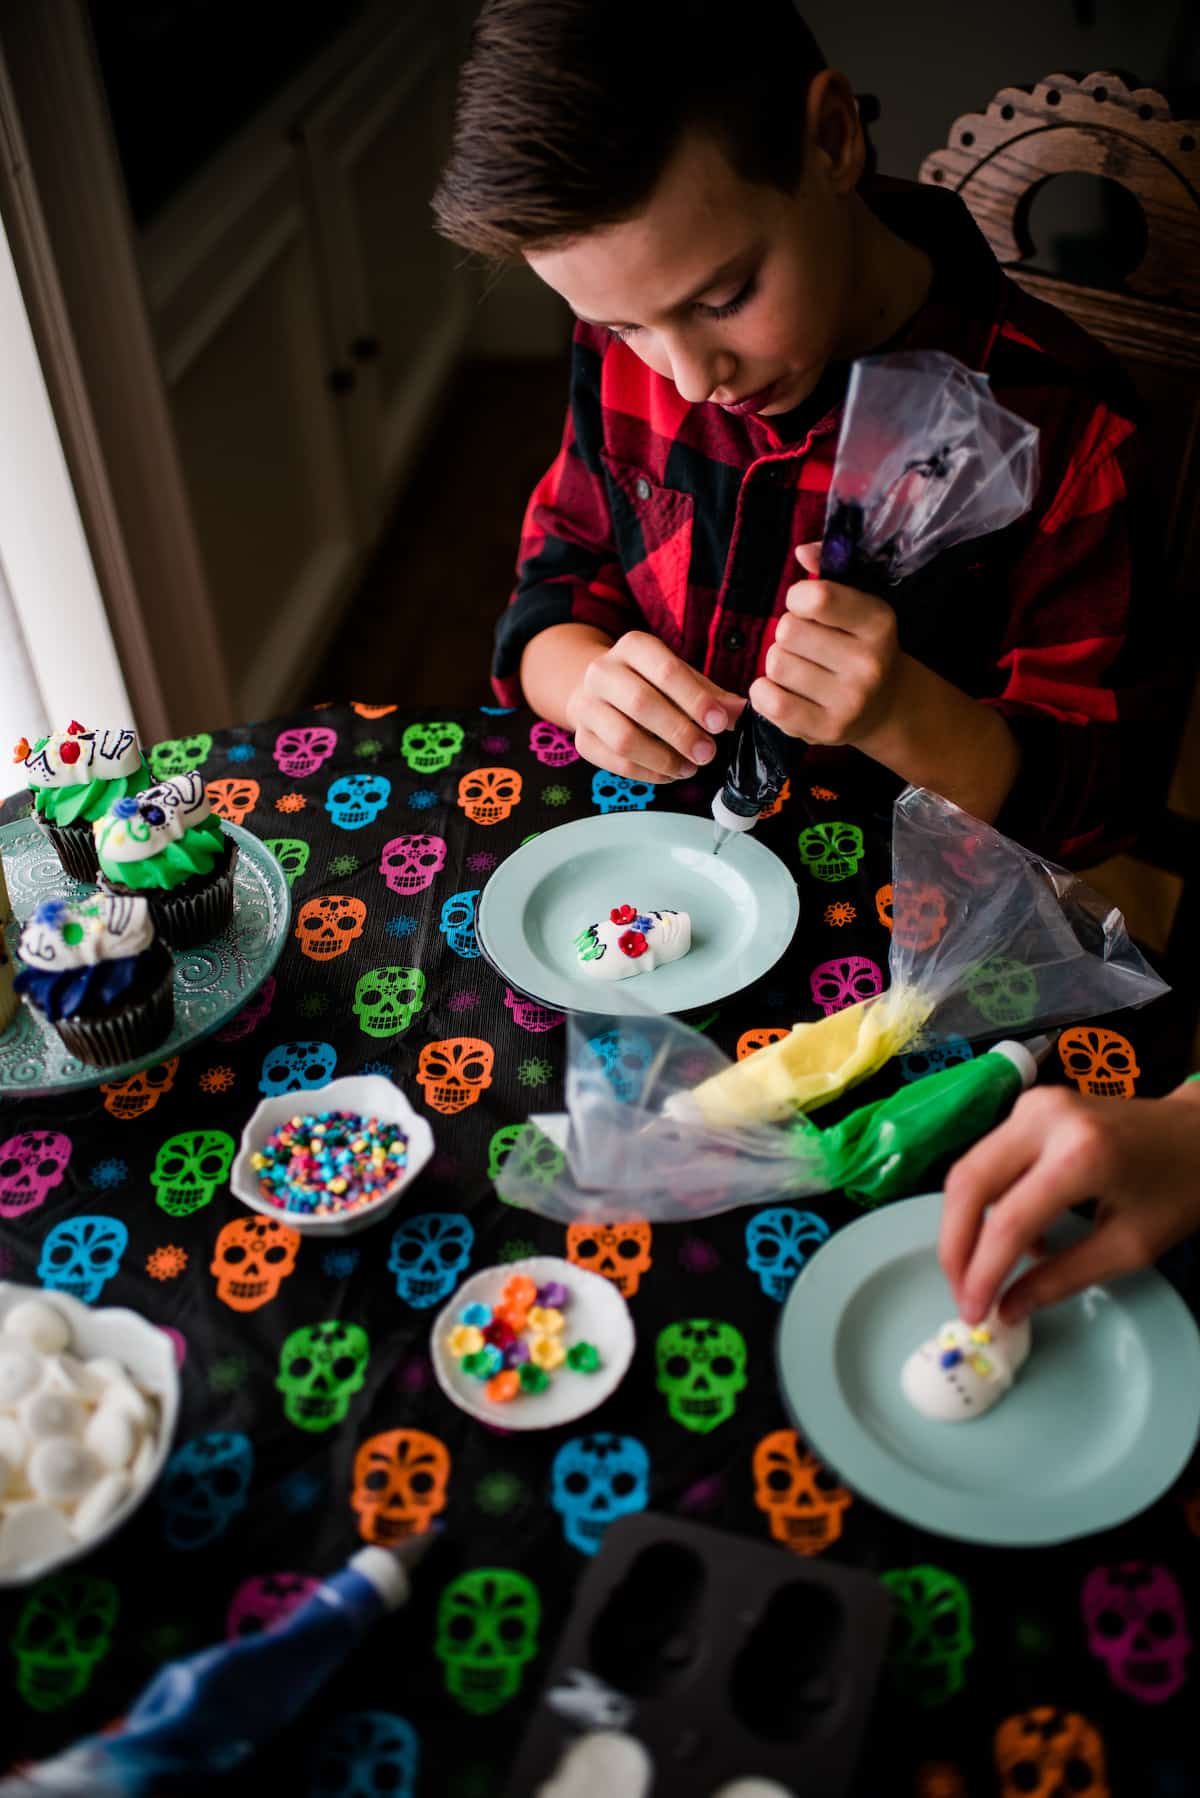 The author's children decorating their Dia de los Muertos candy skulls with colorful frosting, candy flowers, and sprinkles on top of a colorful skull tablecloth 